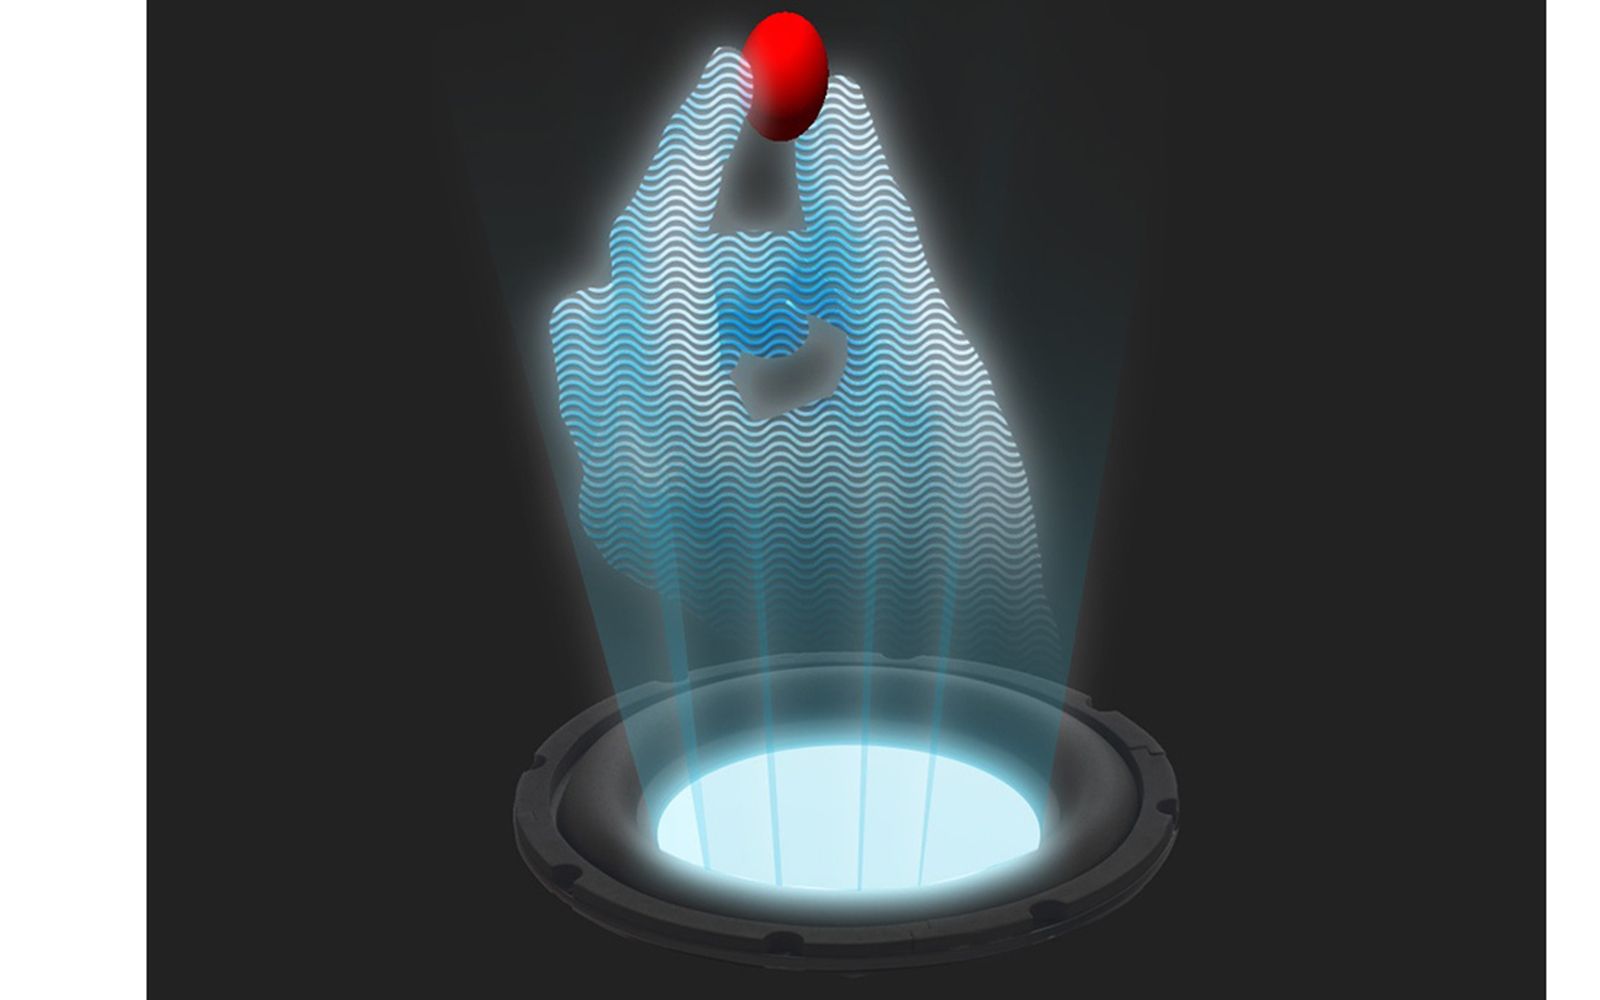 real tractor beam shown off moving objects through the air image 1